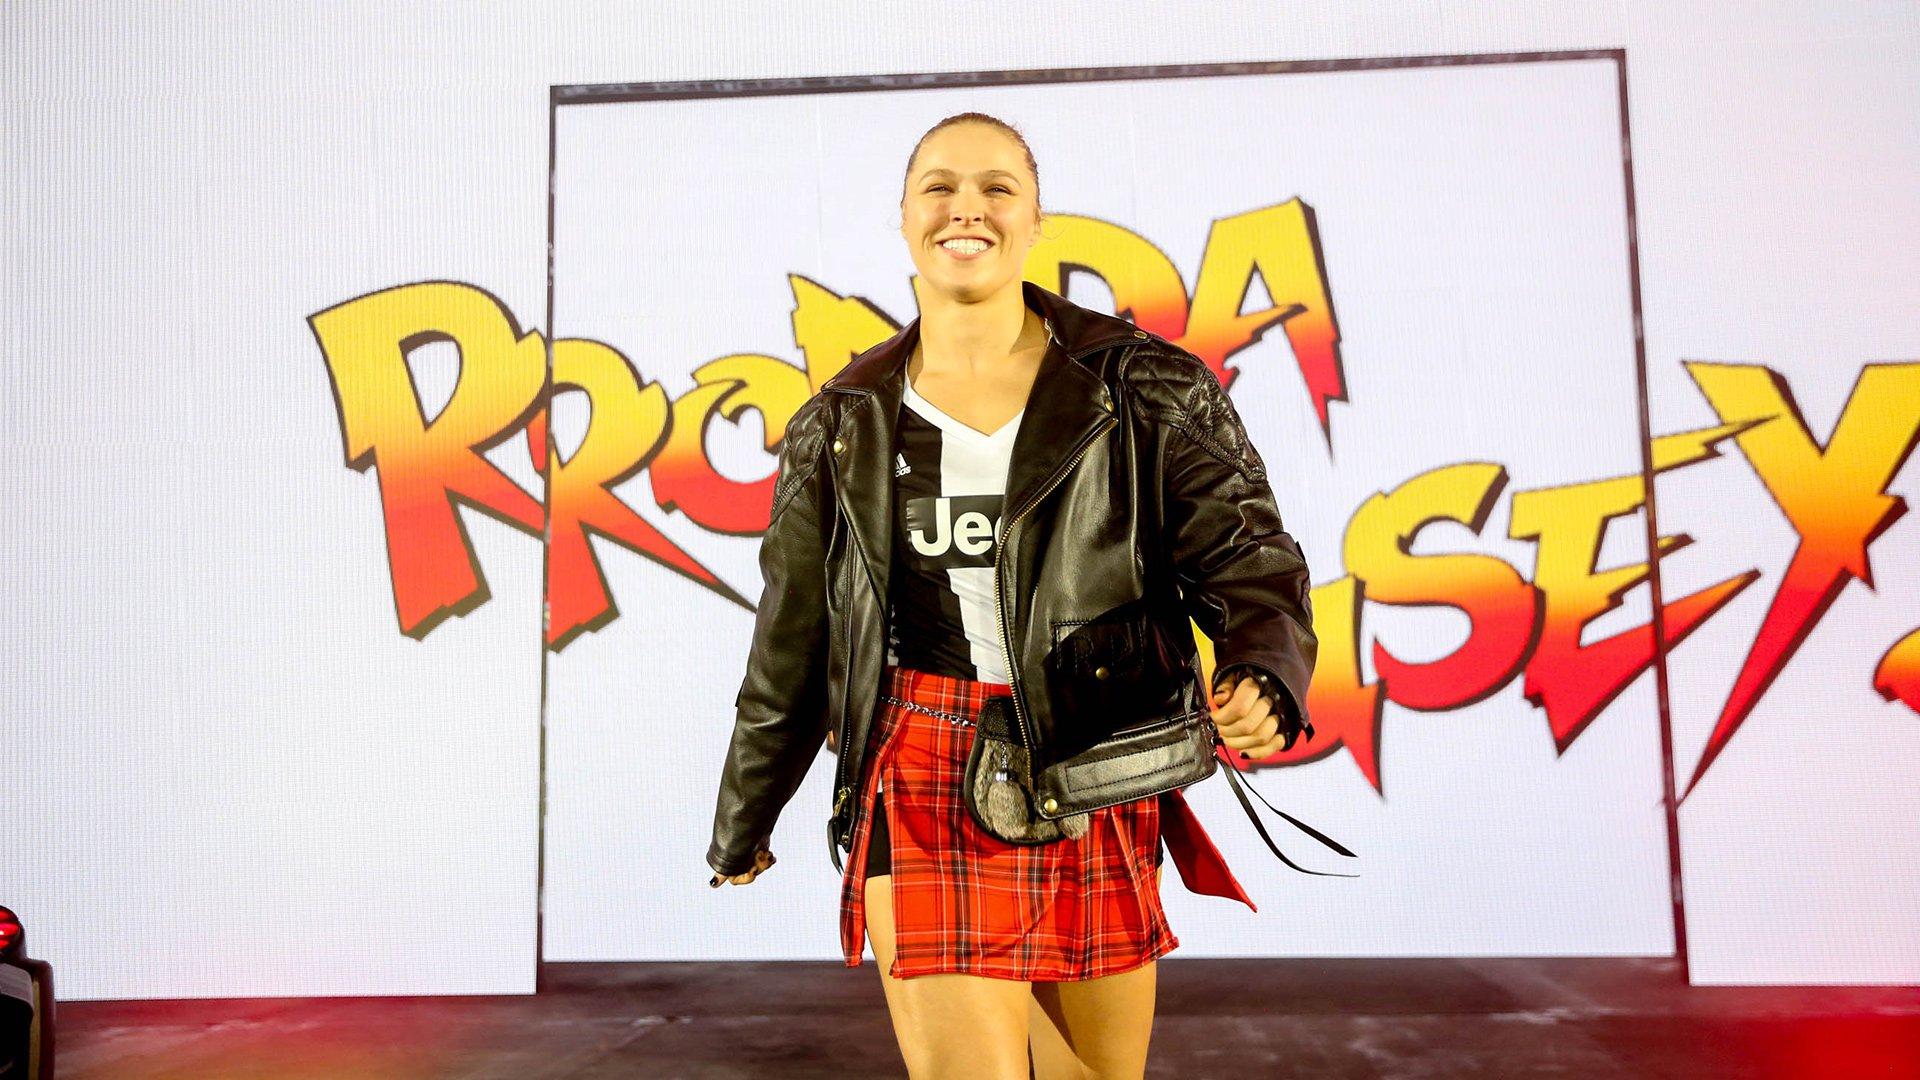 Ronda Rousey to make Spain WWE debut, return to Italy this